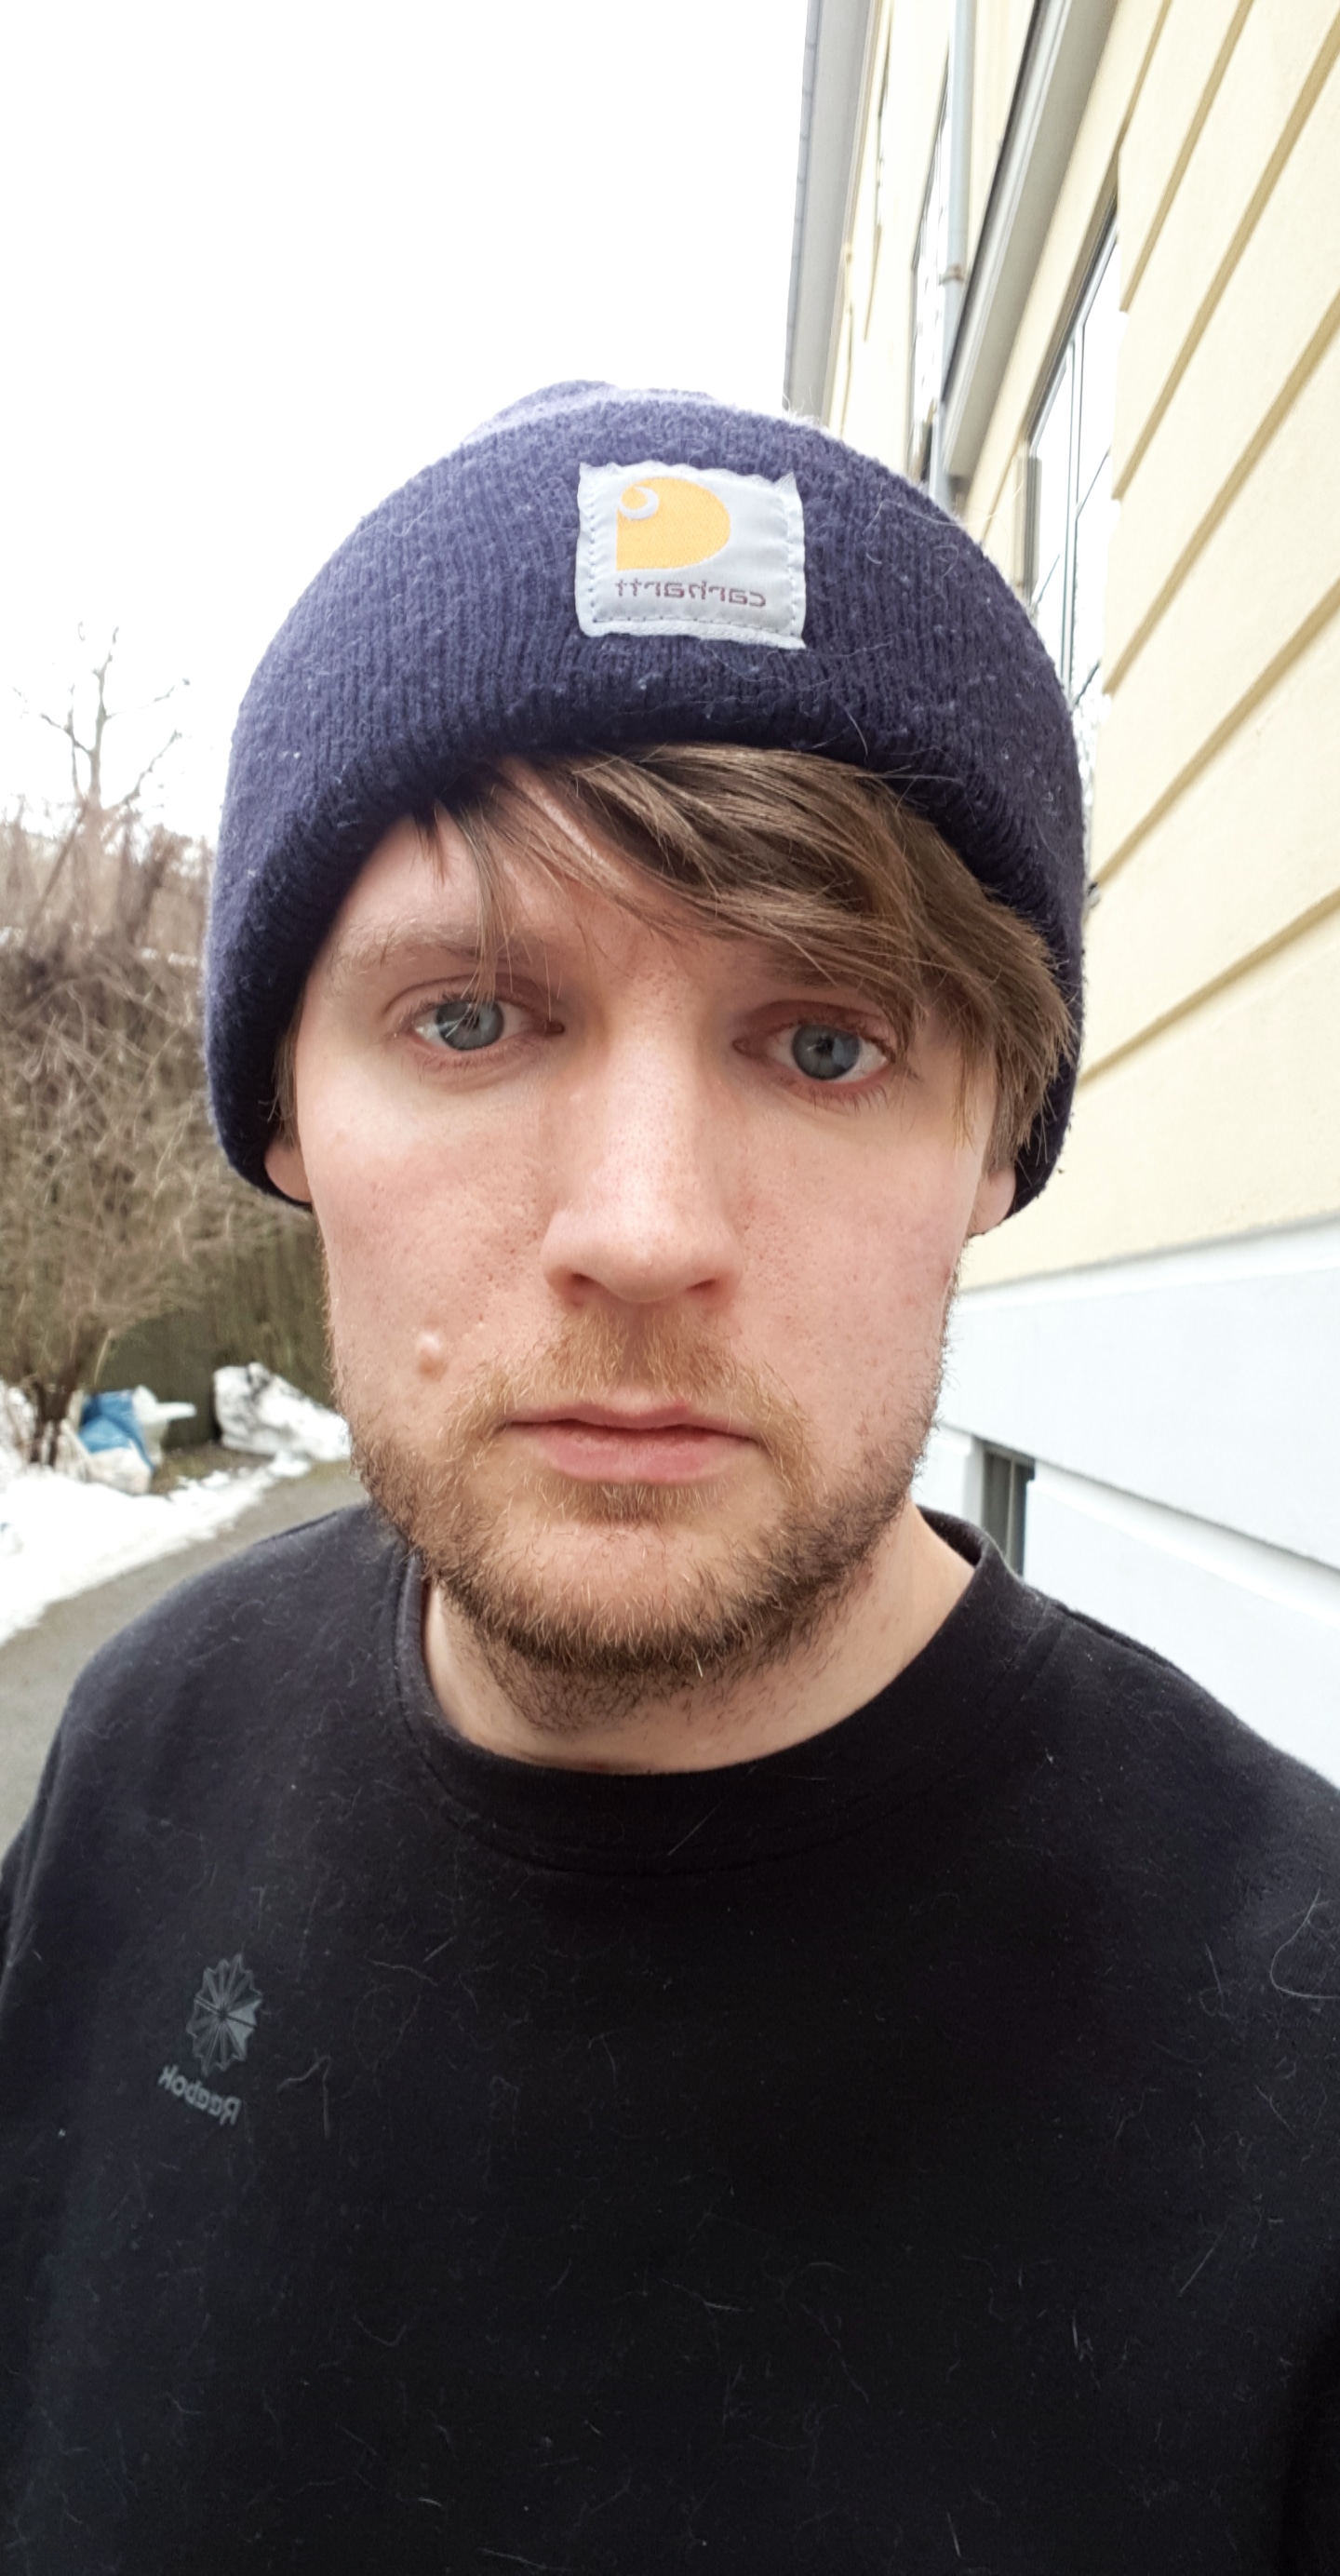 A photo of coxy (Matt Cox) looking sraight into the camera, wearing a navy blue beanie hat with a stiched on Carrahatt logo, covering his hear which peaks through underneath, swept across his forehead and slight whisping over his eyes. He is outsite, stood by a beige apartment block.